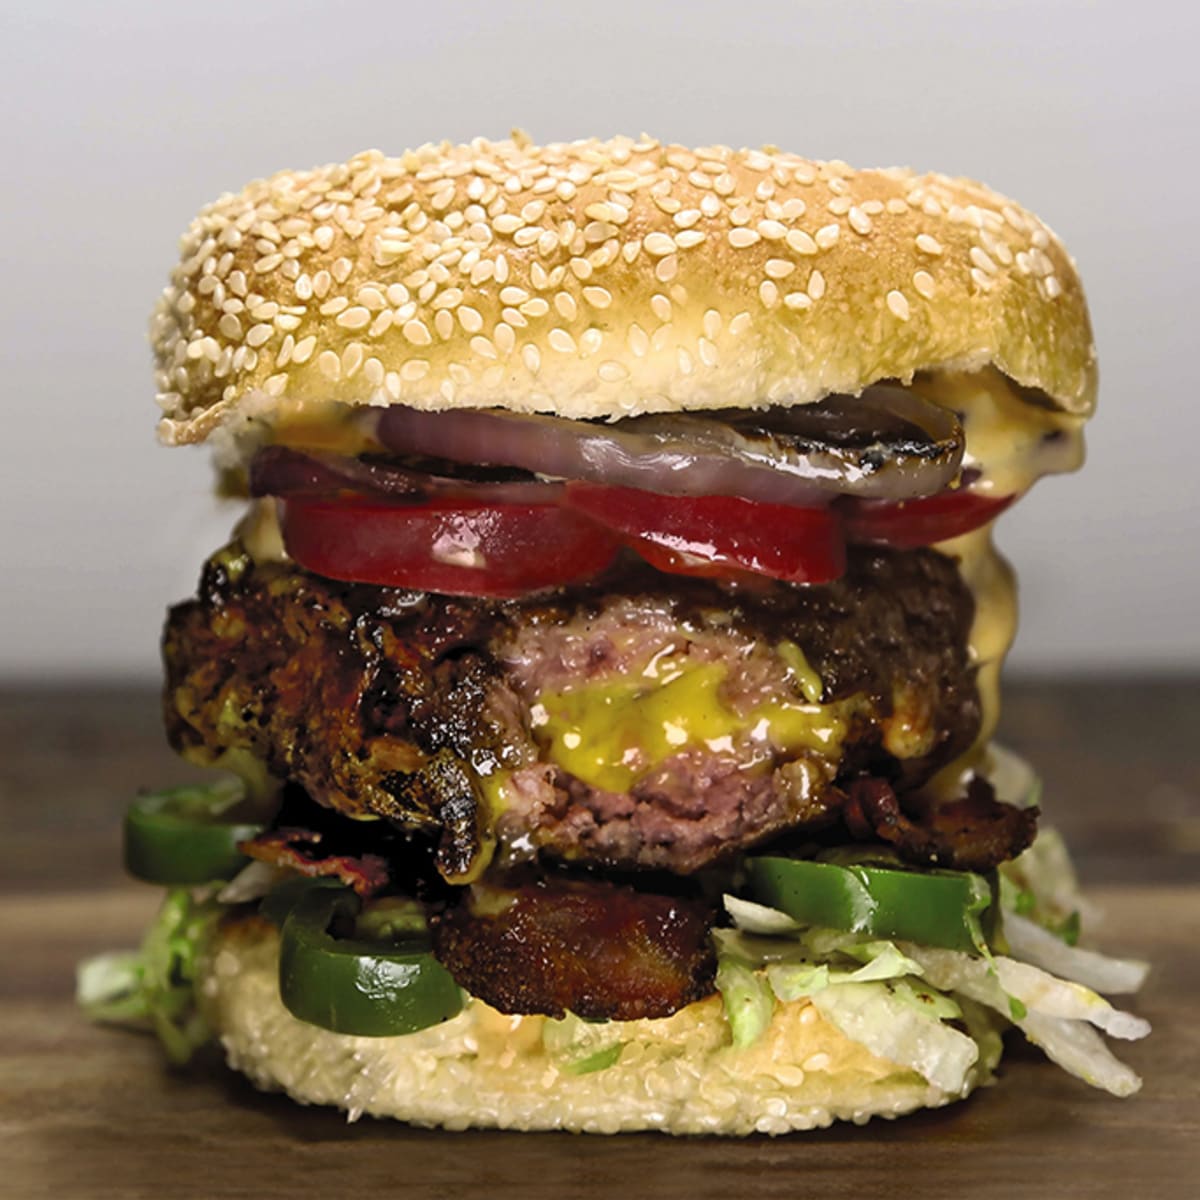 Burger Porn - This Loaded Burger Is as Good as It Looks %%sep%%  %%sitename%% - Men's Journal